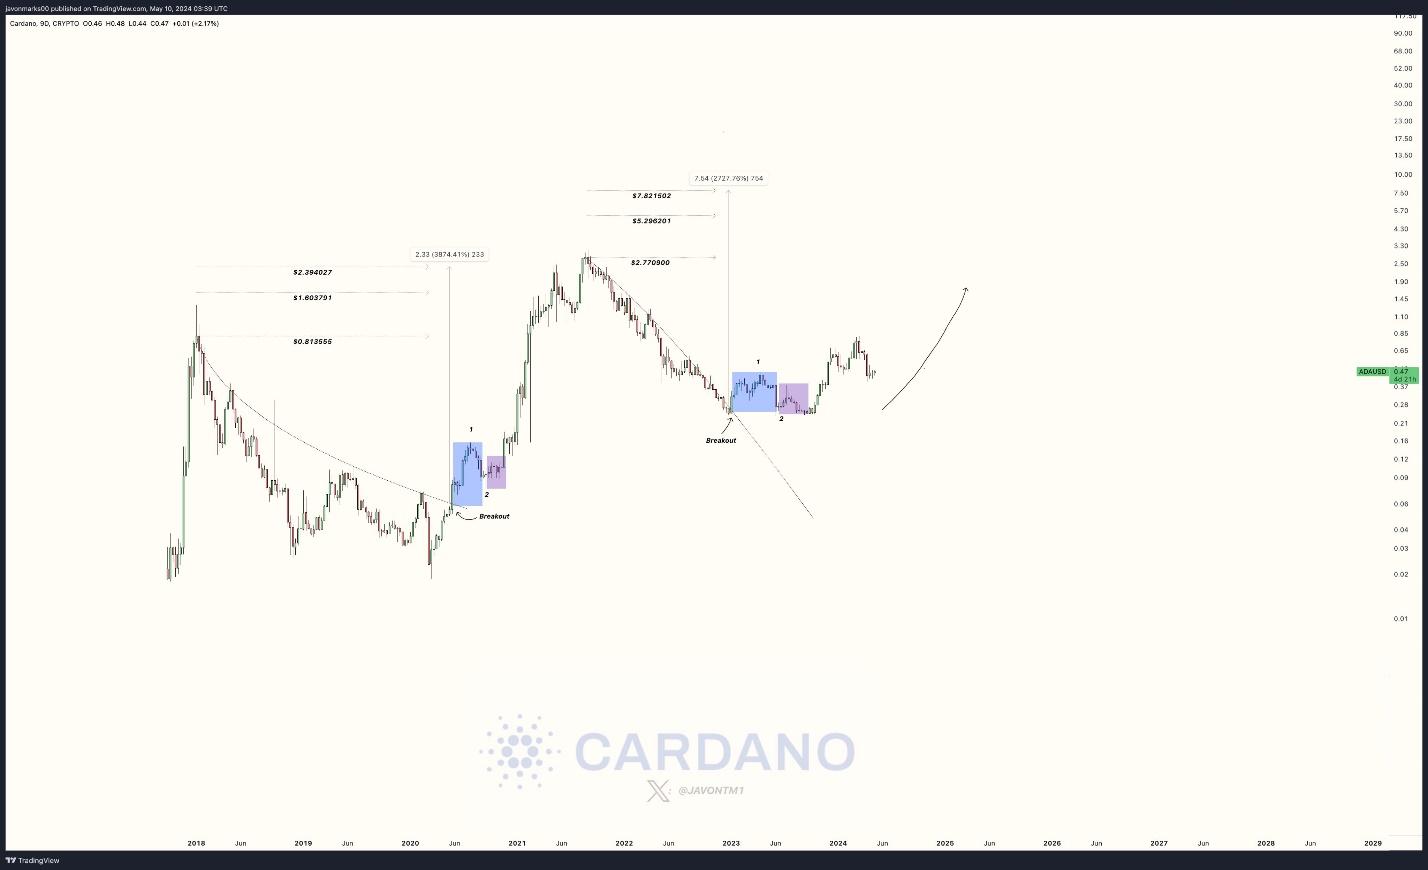 Peter Brandt’s Cryptic Message on Cardano Stirs Market Anxiety